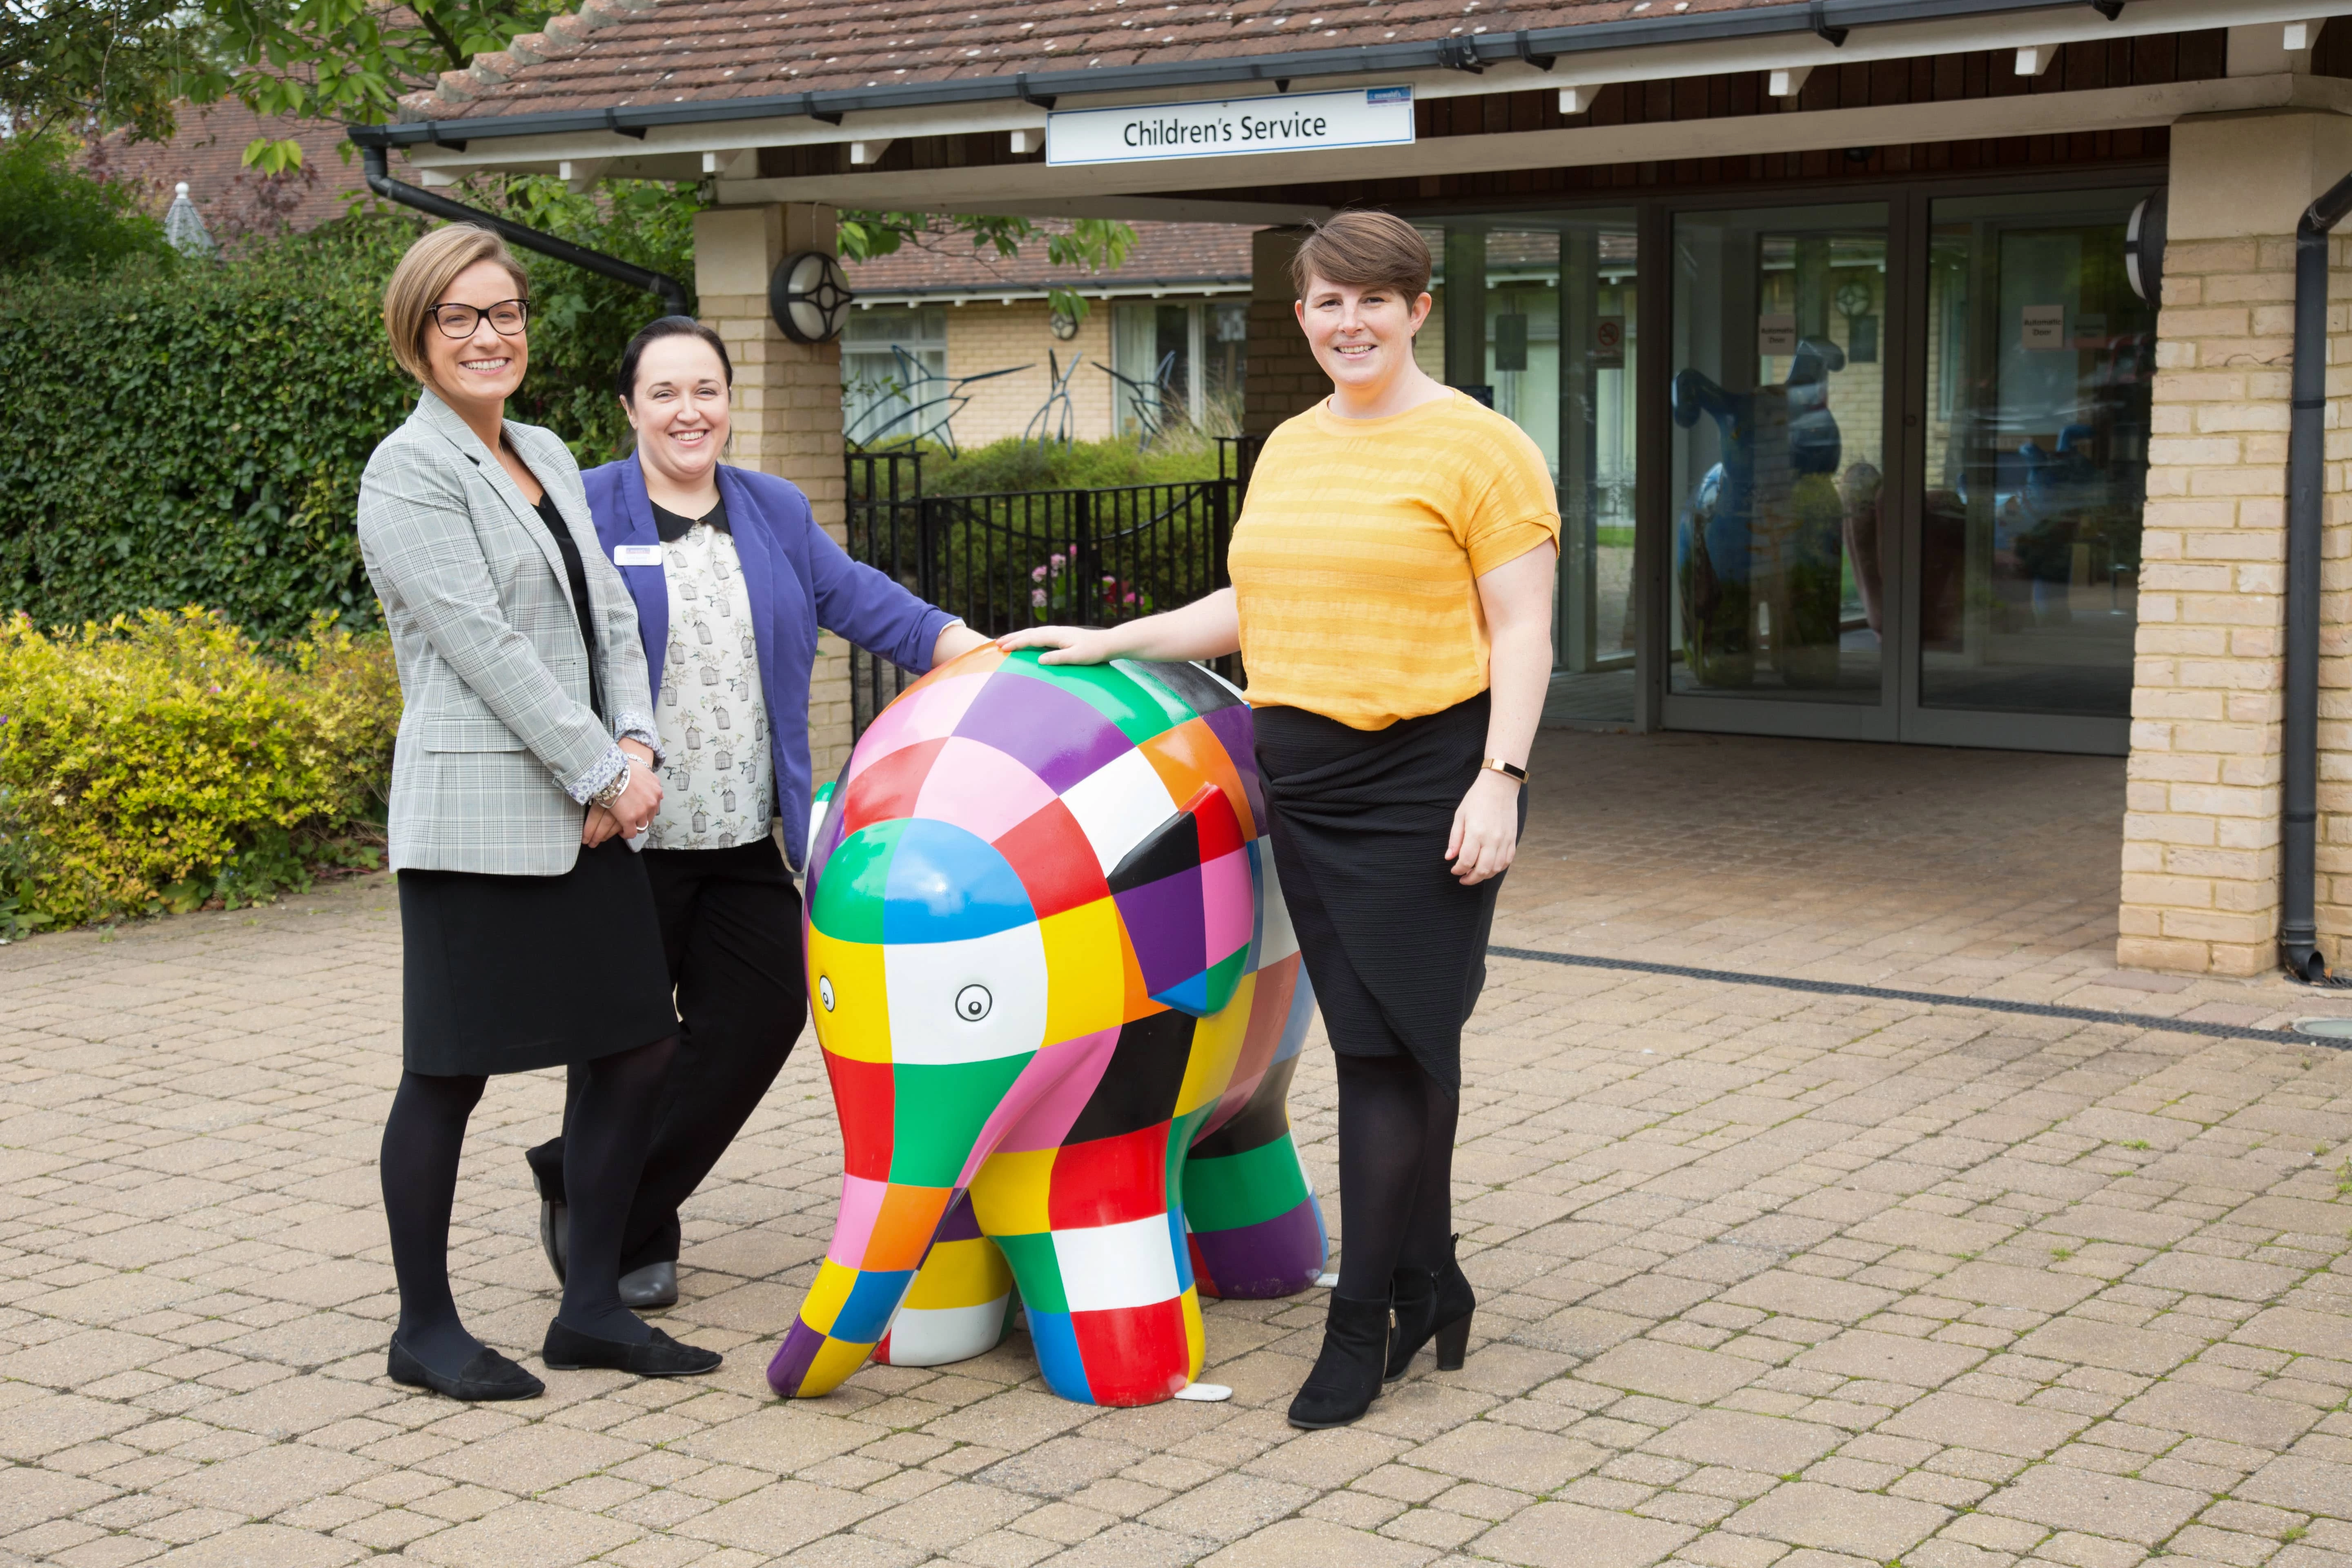 Fran Hale, co-director at First Class Supply; Laura Barrett, senior fundraiser at St Oswald’s Hospice; Julia Pollock, senior education specialist at First Class Supply